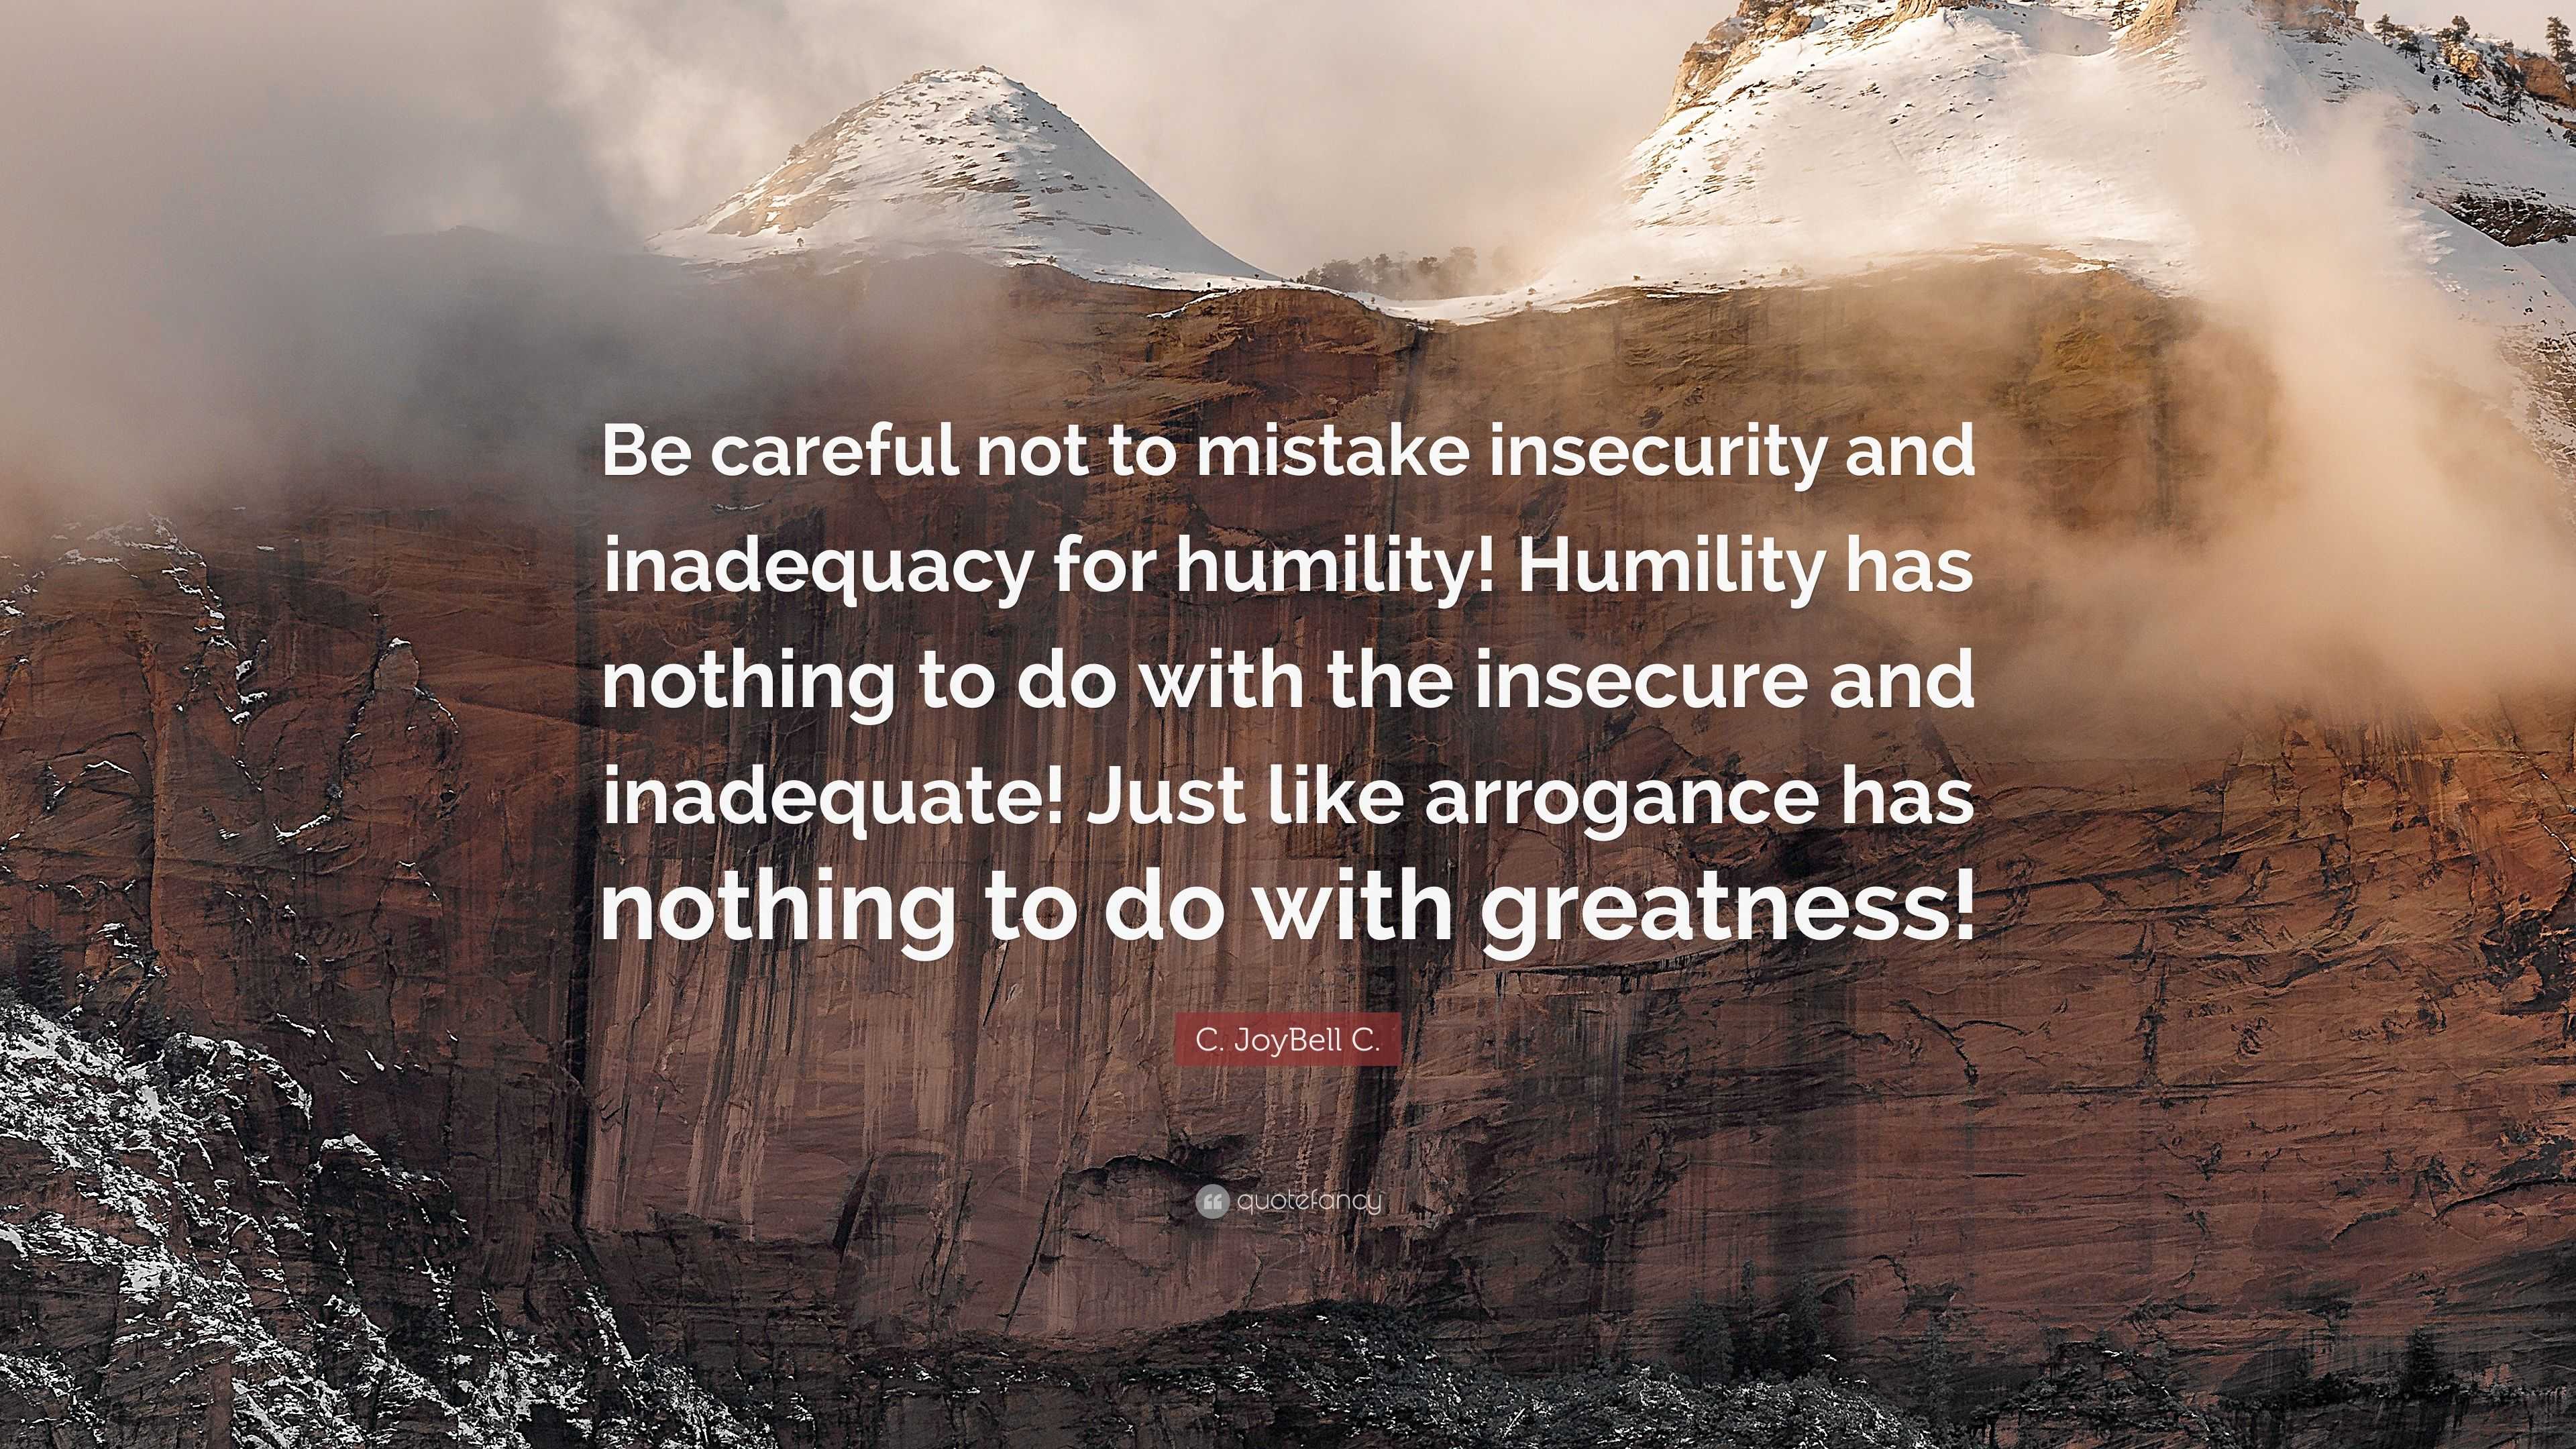 C. JoyBell C. Quote: “Be careful not to mistake insecurity and